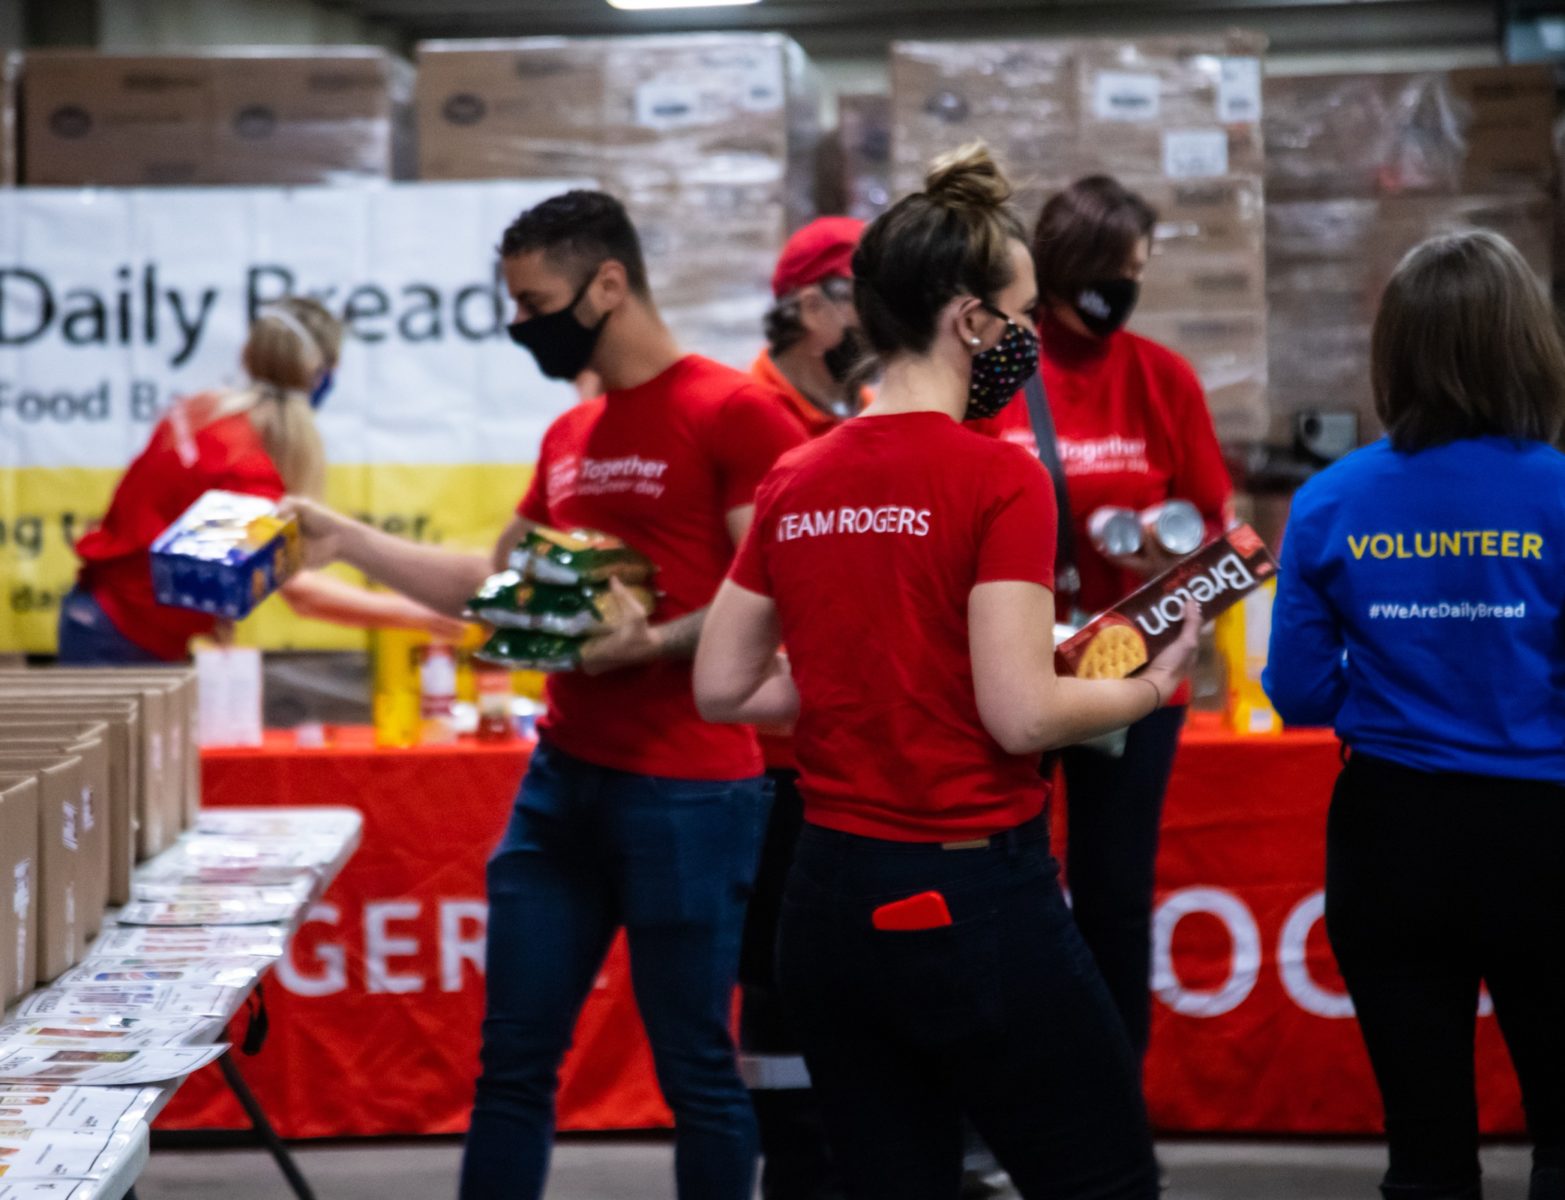 Group of Rogers volunteers packing boxes with food